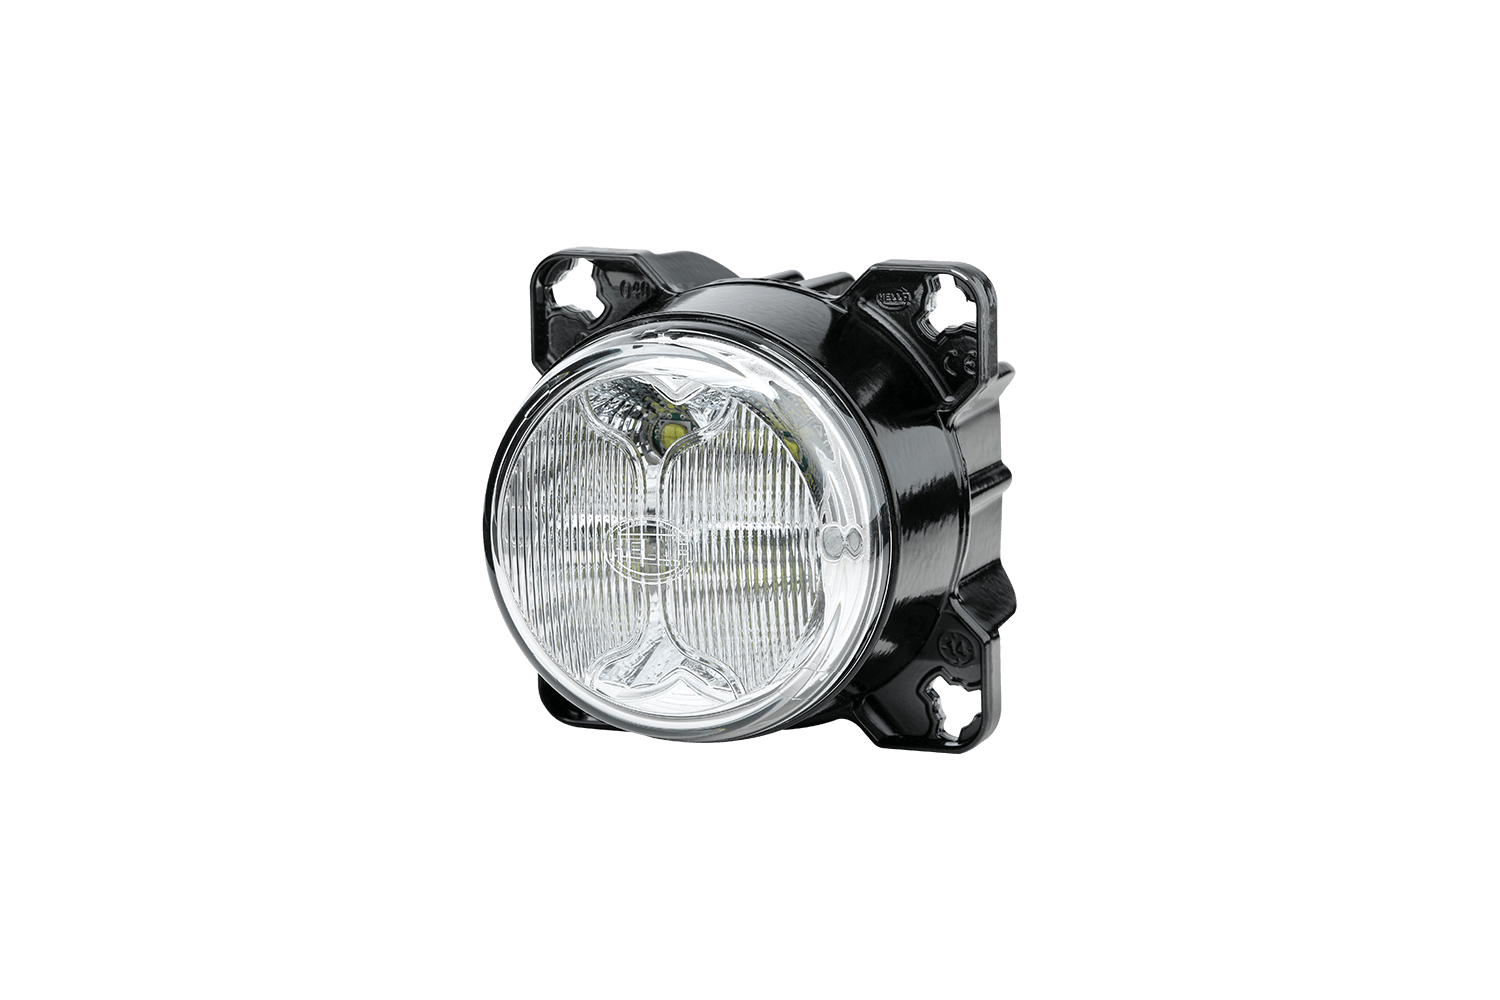 Module 90i LED work lamps from Hella offered by Patlon